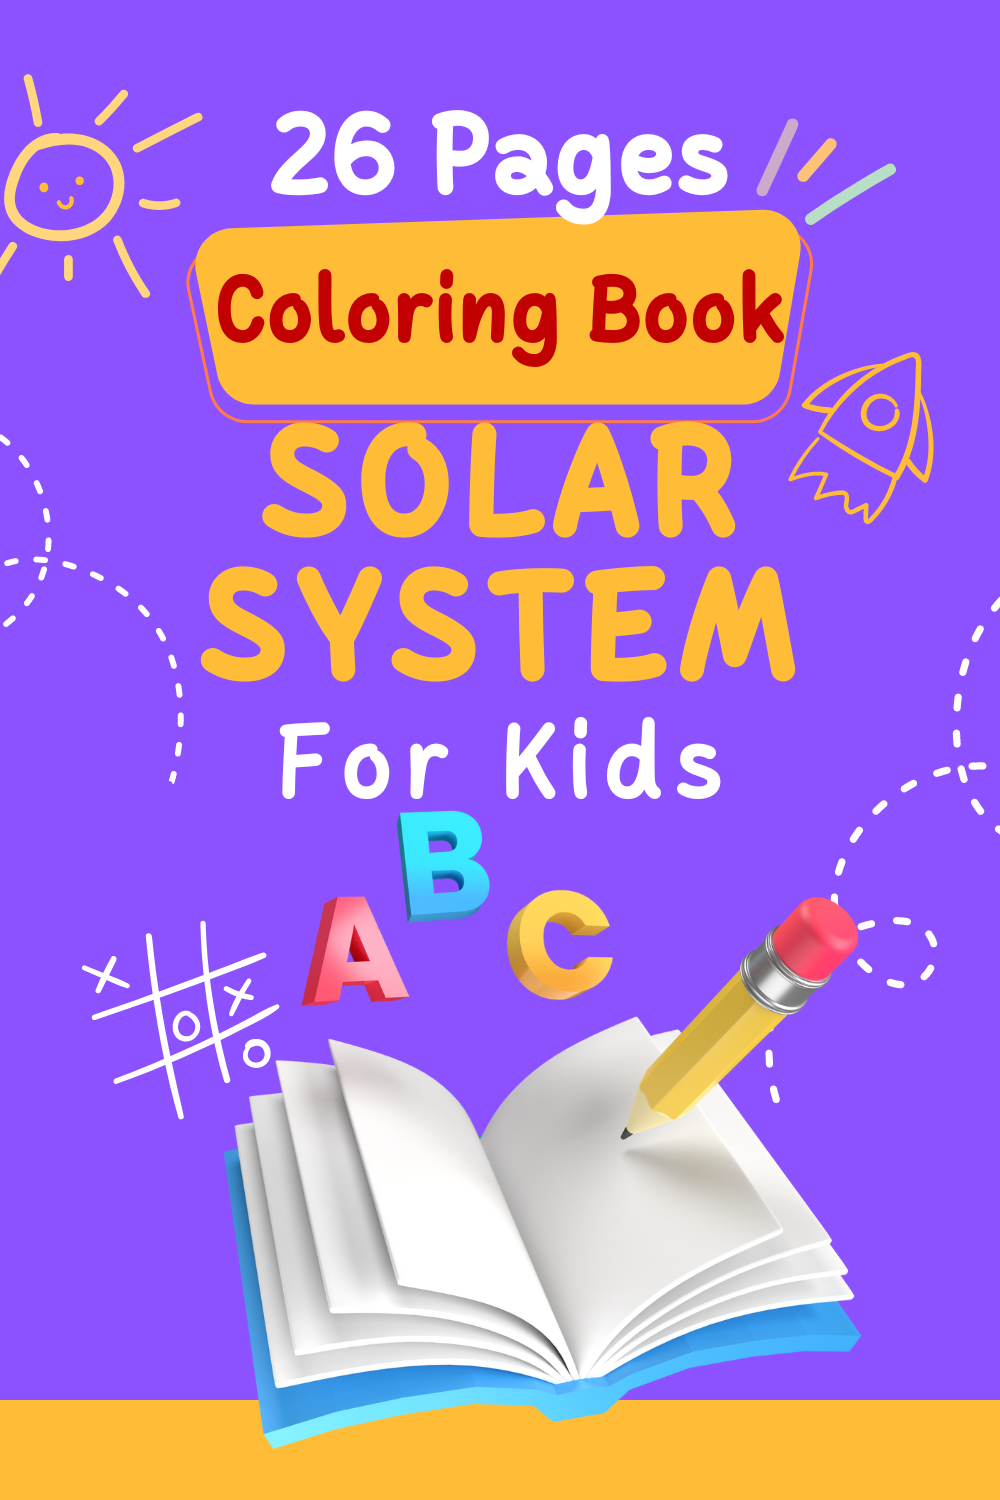 Solar System Coloring Book for Kids Template pinterest image.